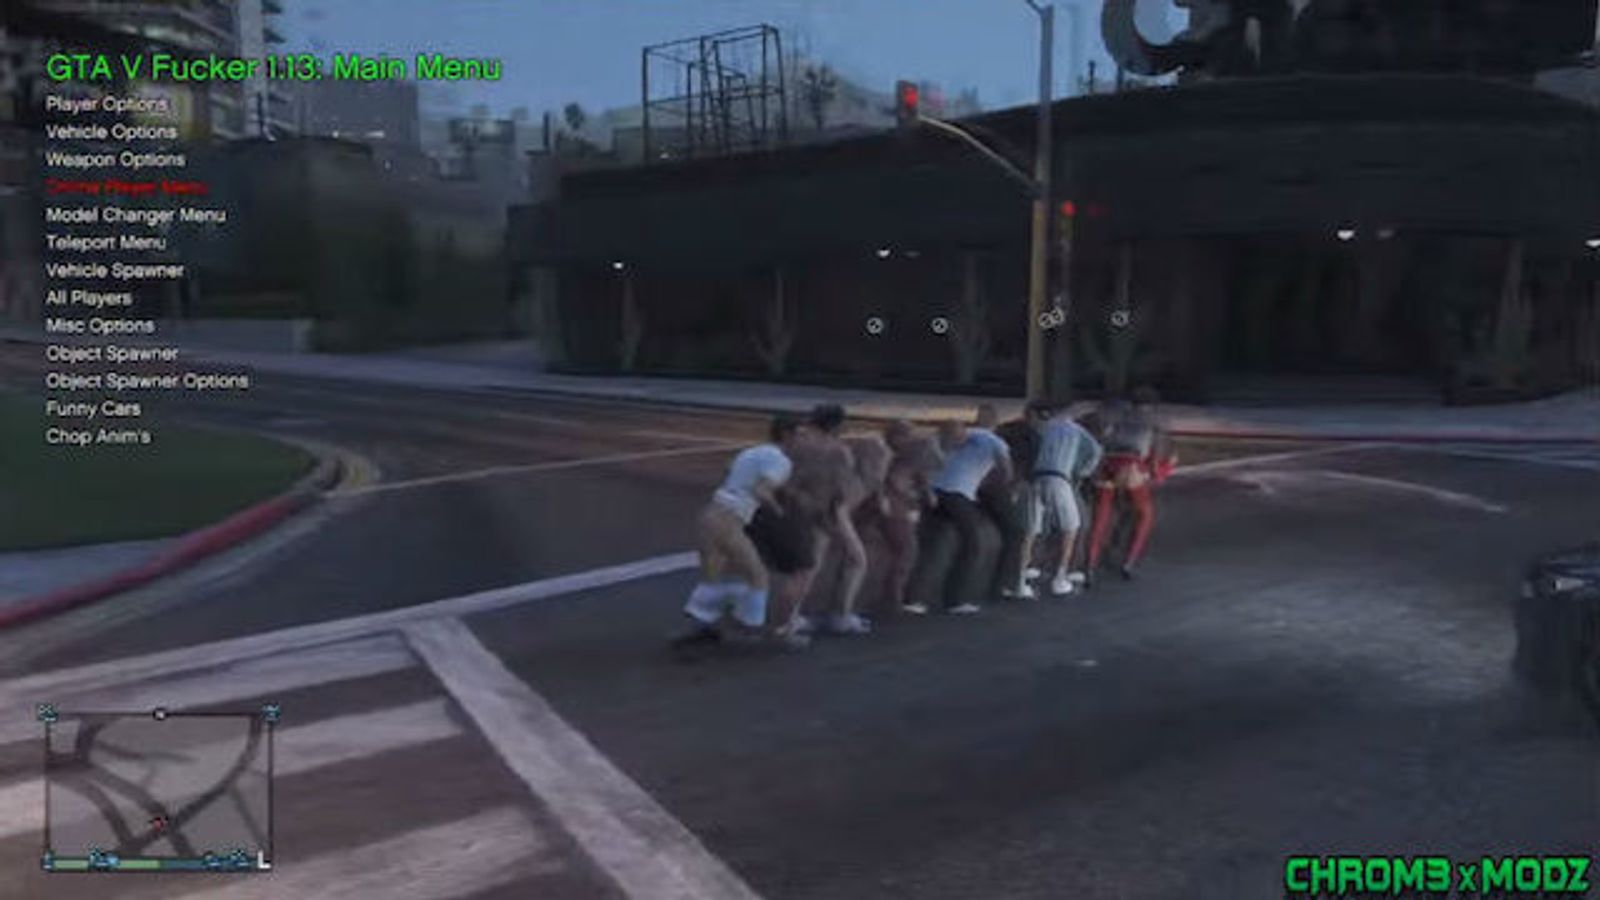 Simulated Sexual Assaults on GTA5 Getting Increased Attention